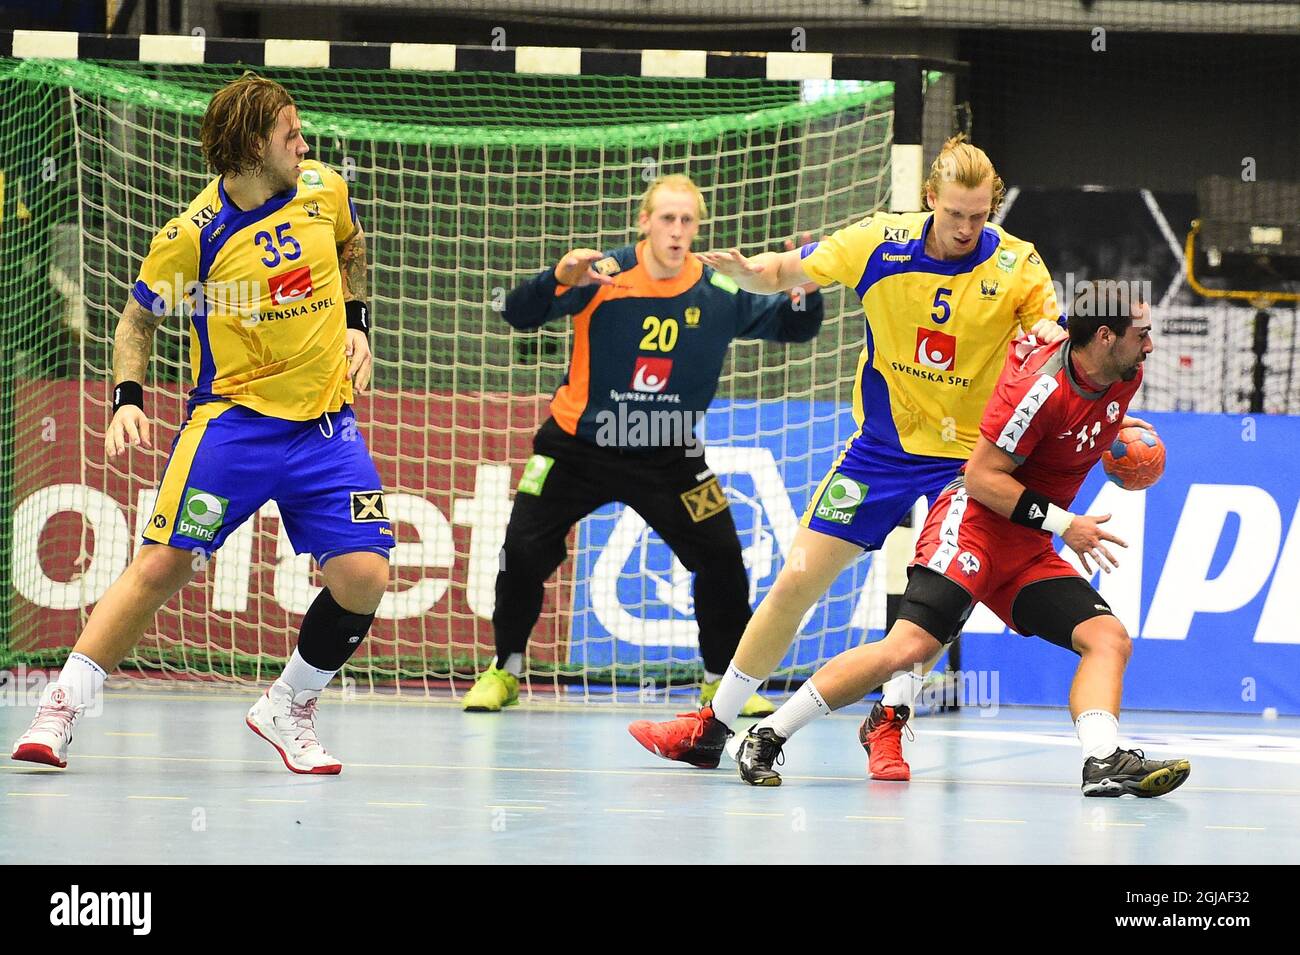 Sweden's Andreas Nilsson (L-R), goalkeeper Mikael Appelgren, Simon Jeppsson and Chil's Esteban Salinas in action during a fiendly handball match between Sweden and Chile at Baltiska Hallen in Malmoe, Sweden, on Jan. 09, 2017. Photo: Emil Langvad / TT / code 9290 Stock Photo